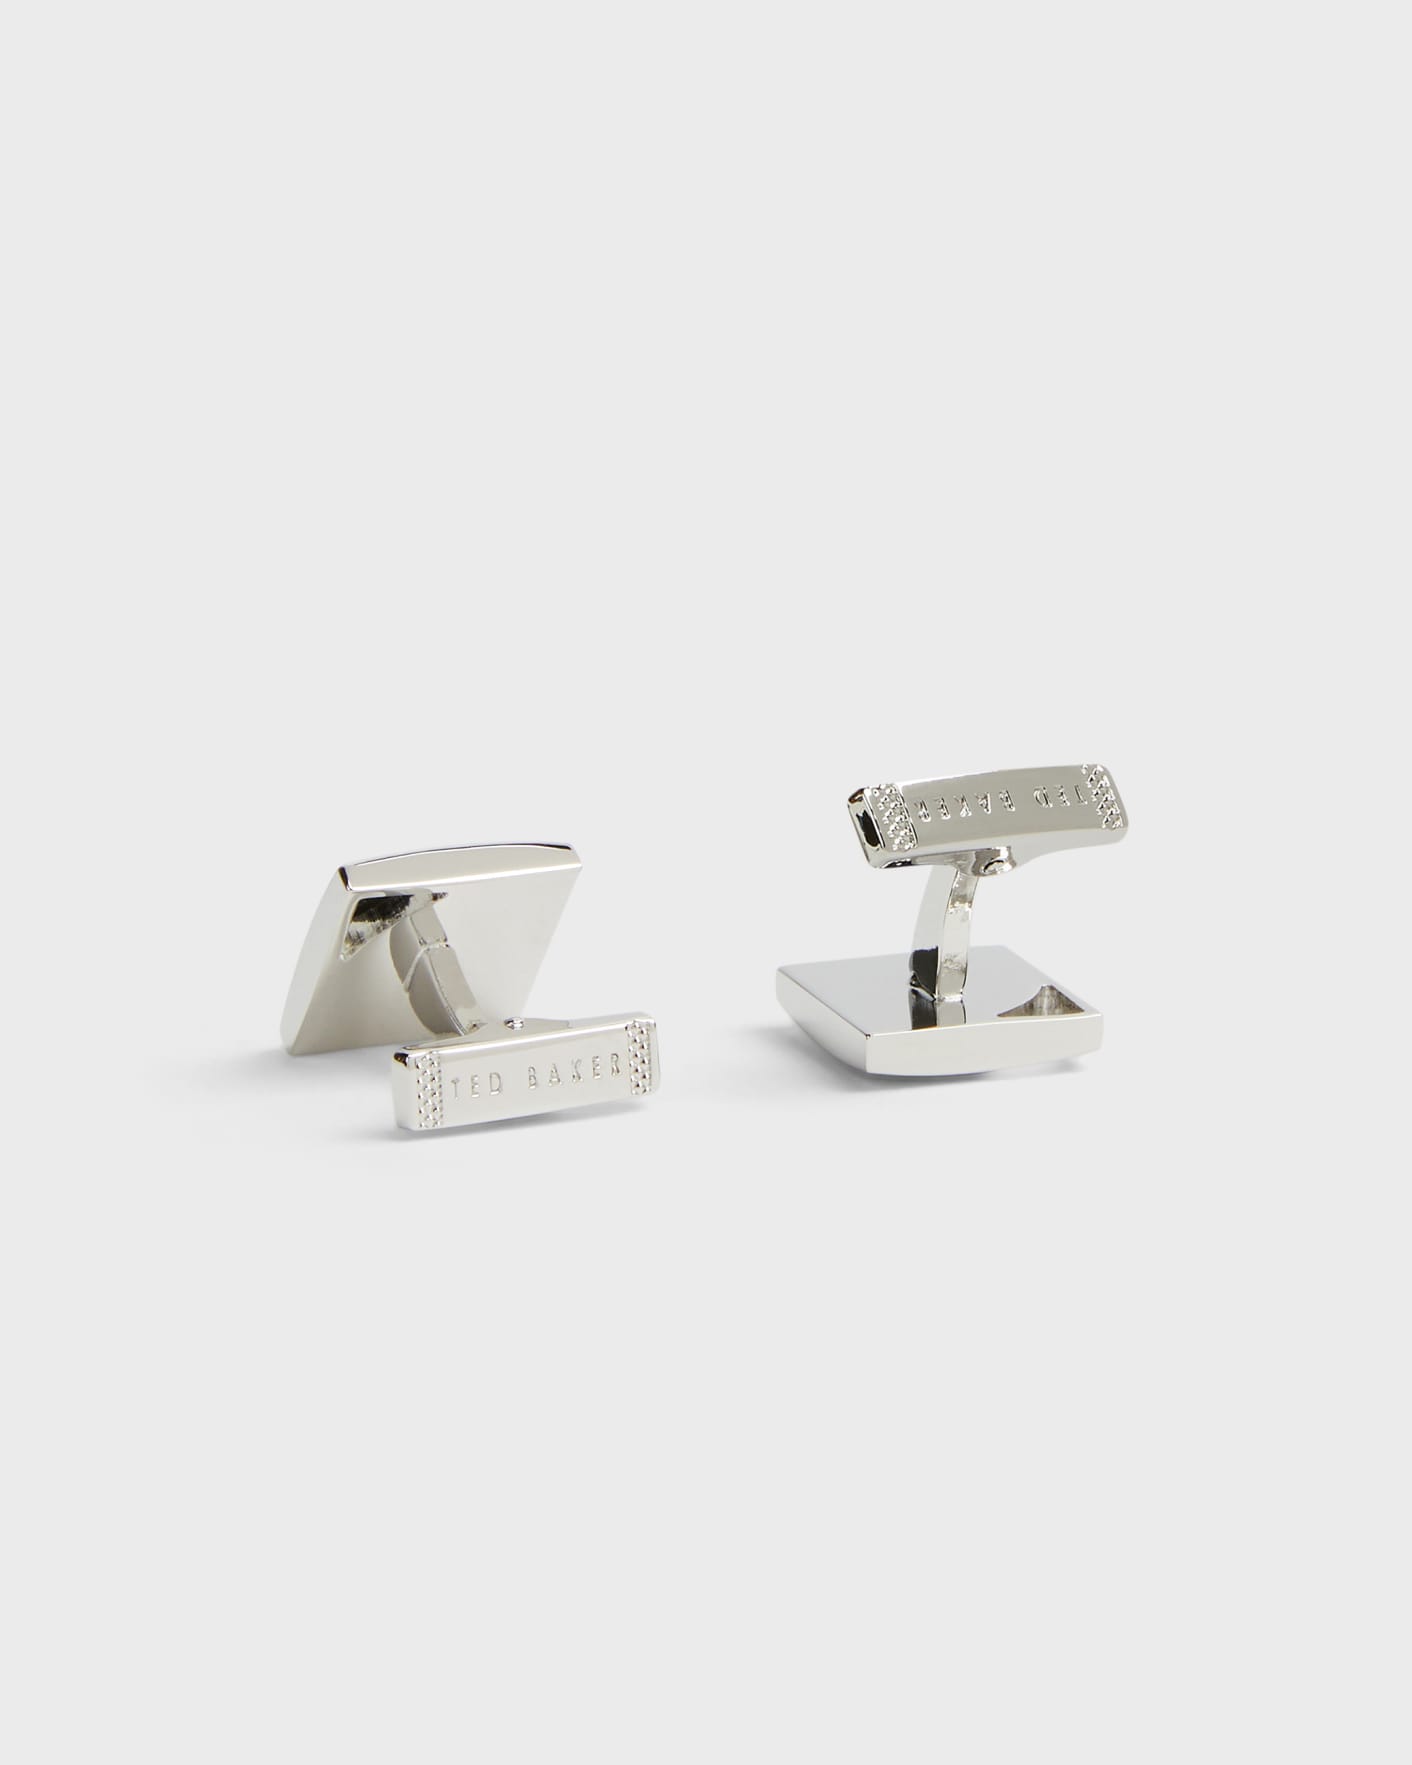 Silver Color Square Cufflinks with Corner Cut Out Ted Baker